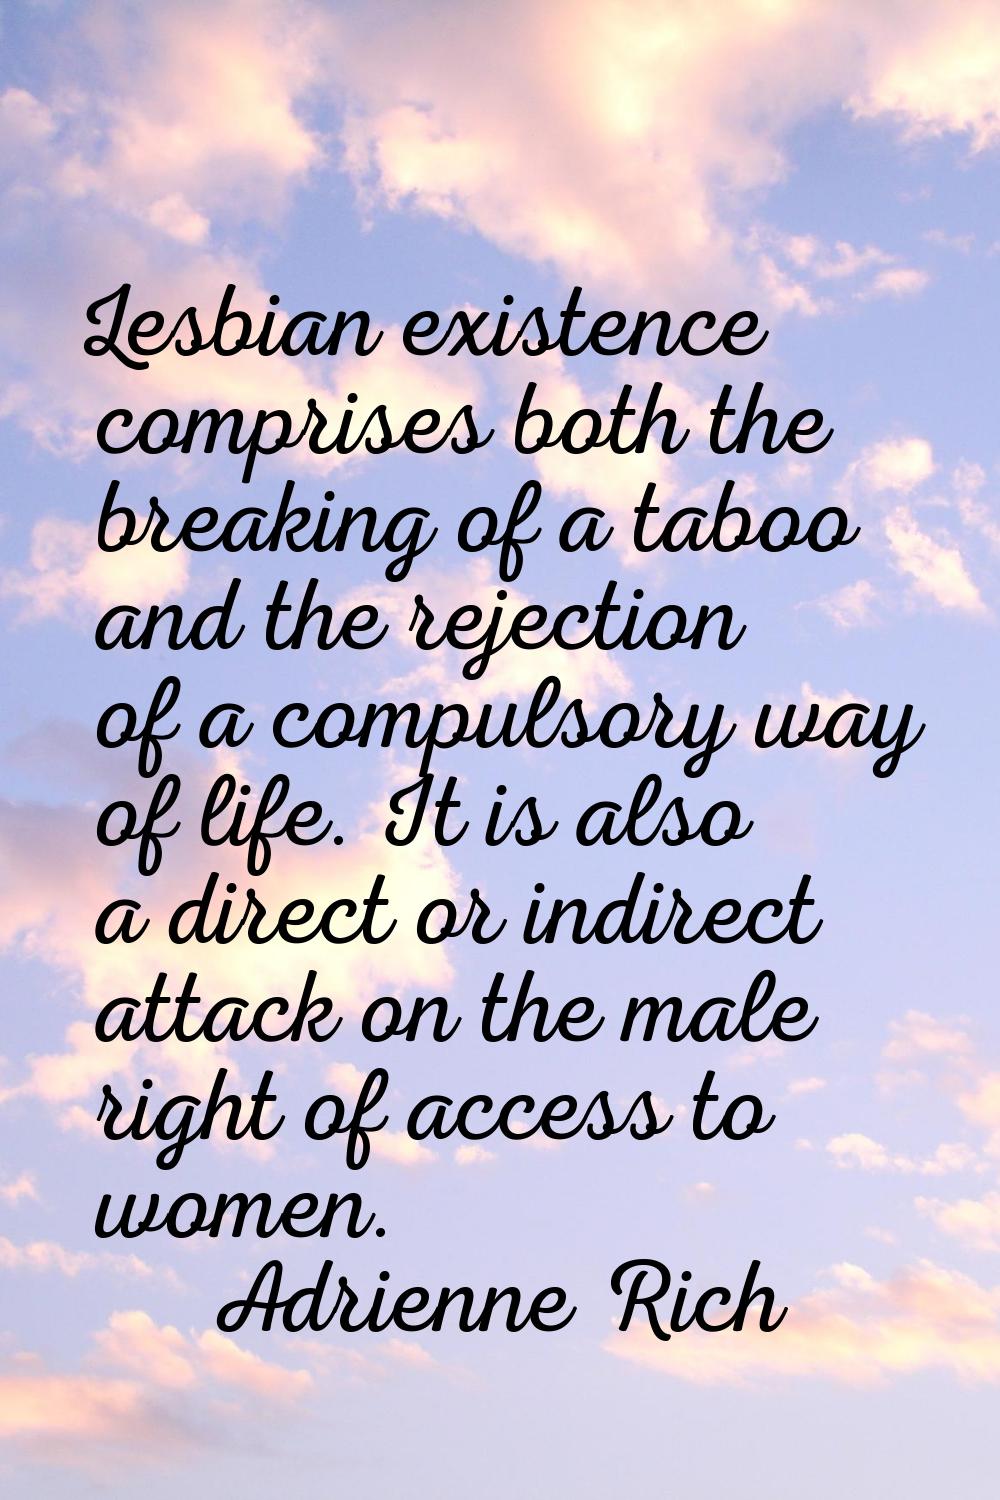 Lesbian existence comprises both the breaking of a taboo and the rejection of a compulsory way of l